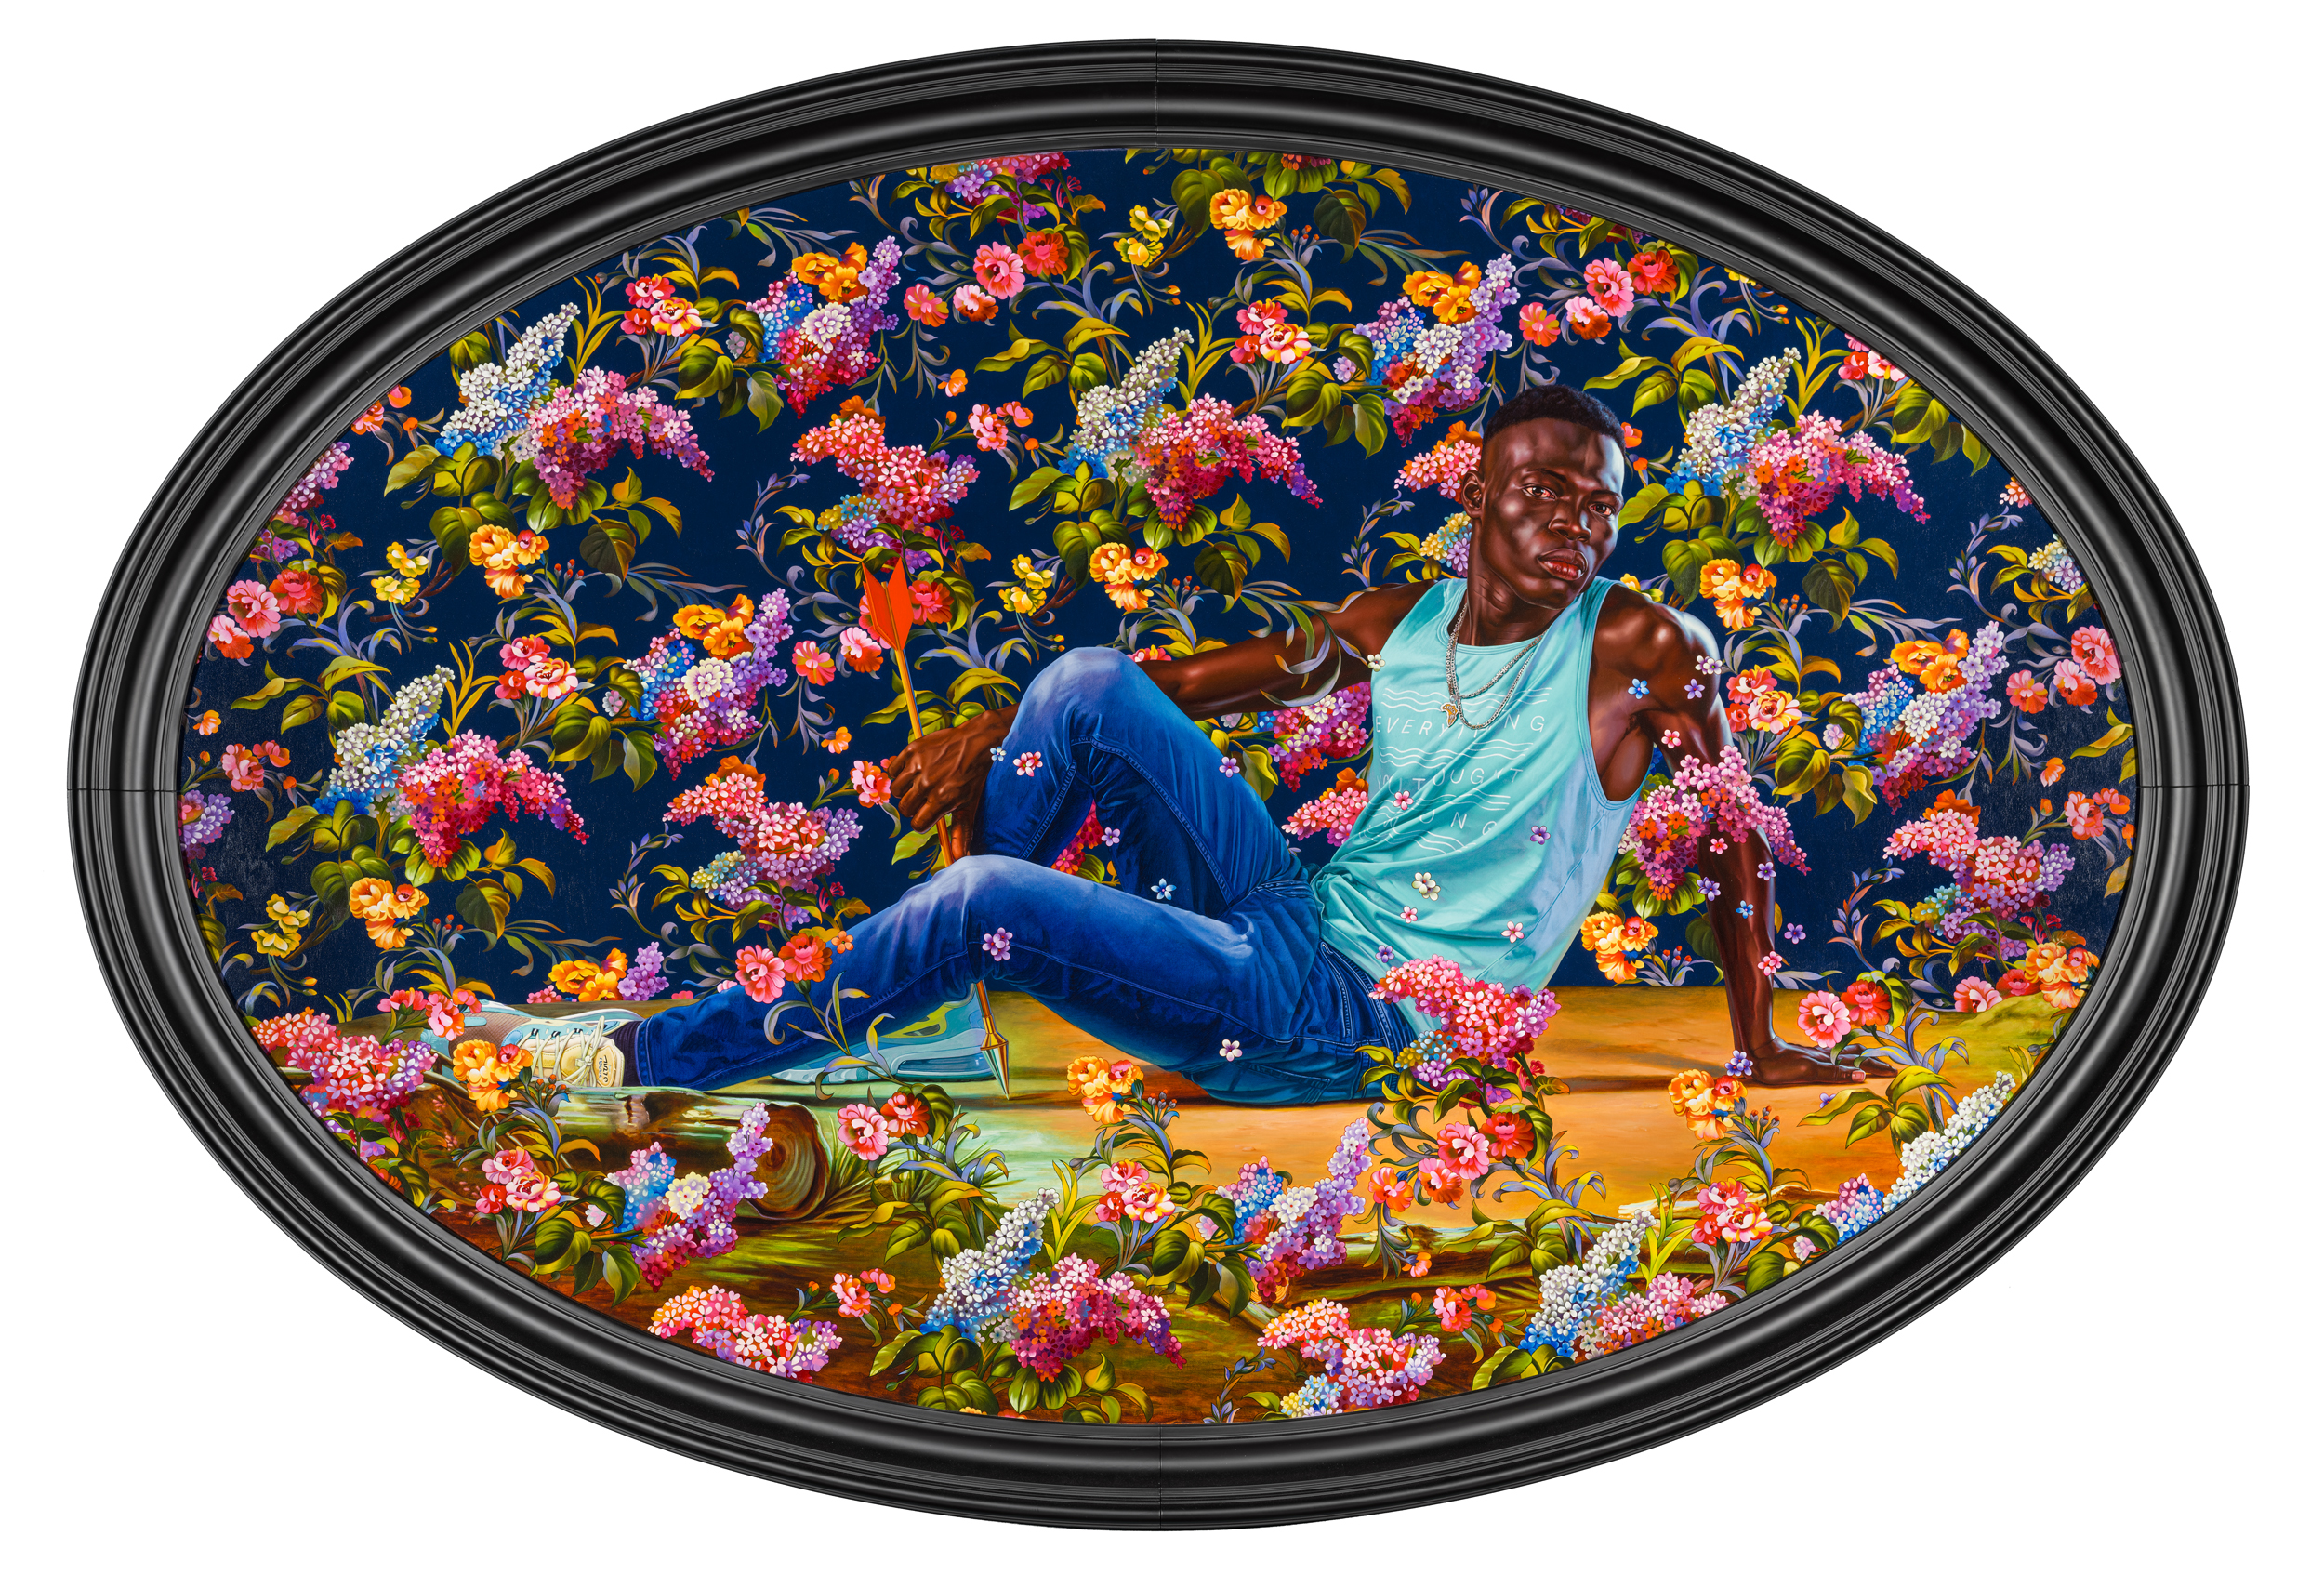 kehindewiley_anarchaeologyofsilence_The Wounded Achilles